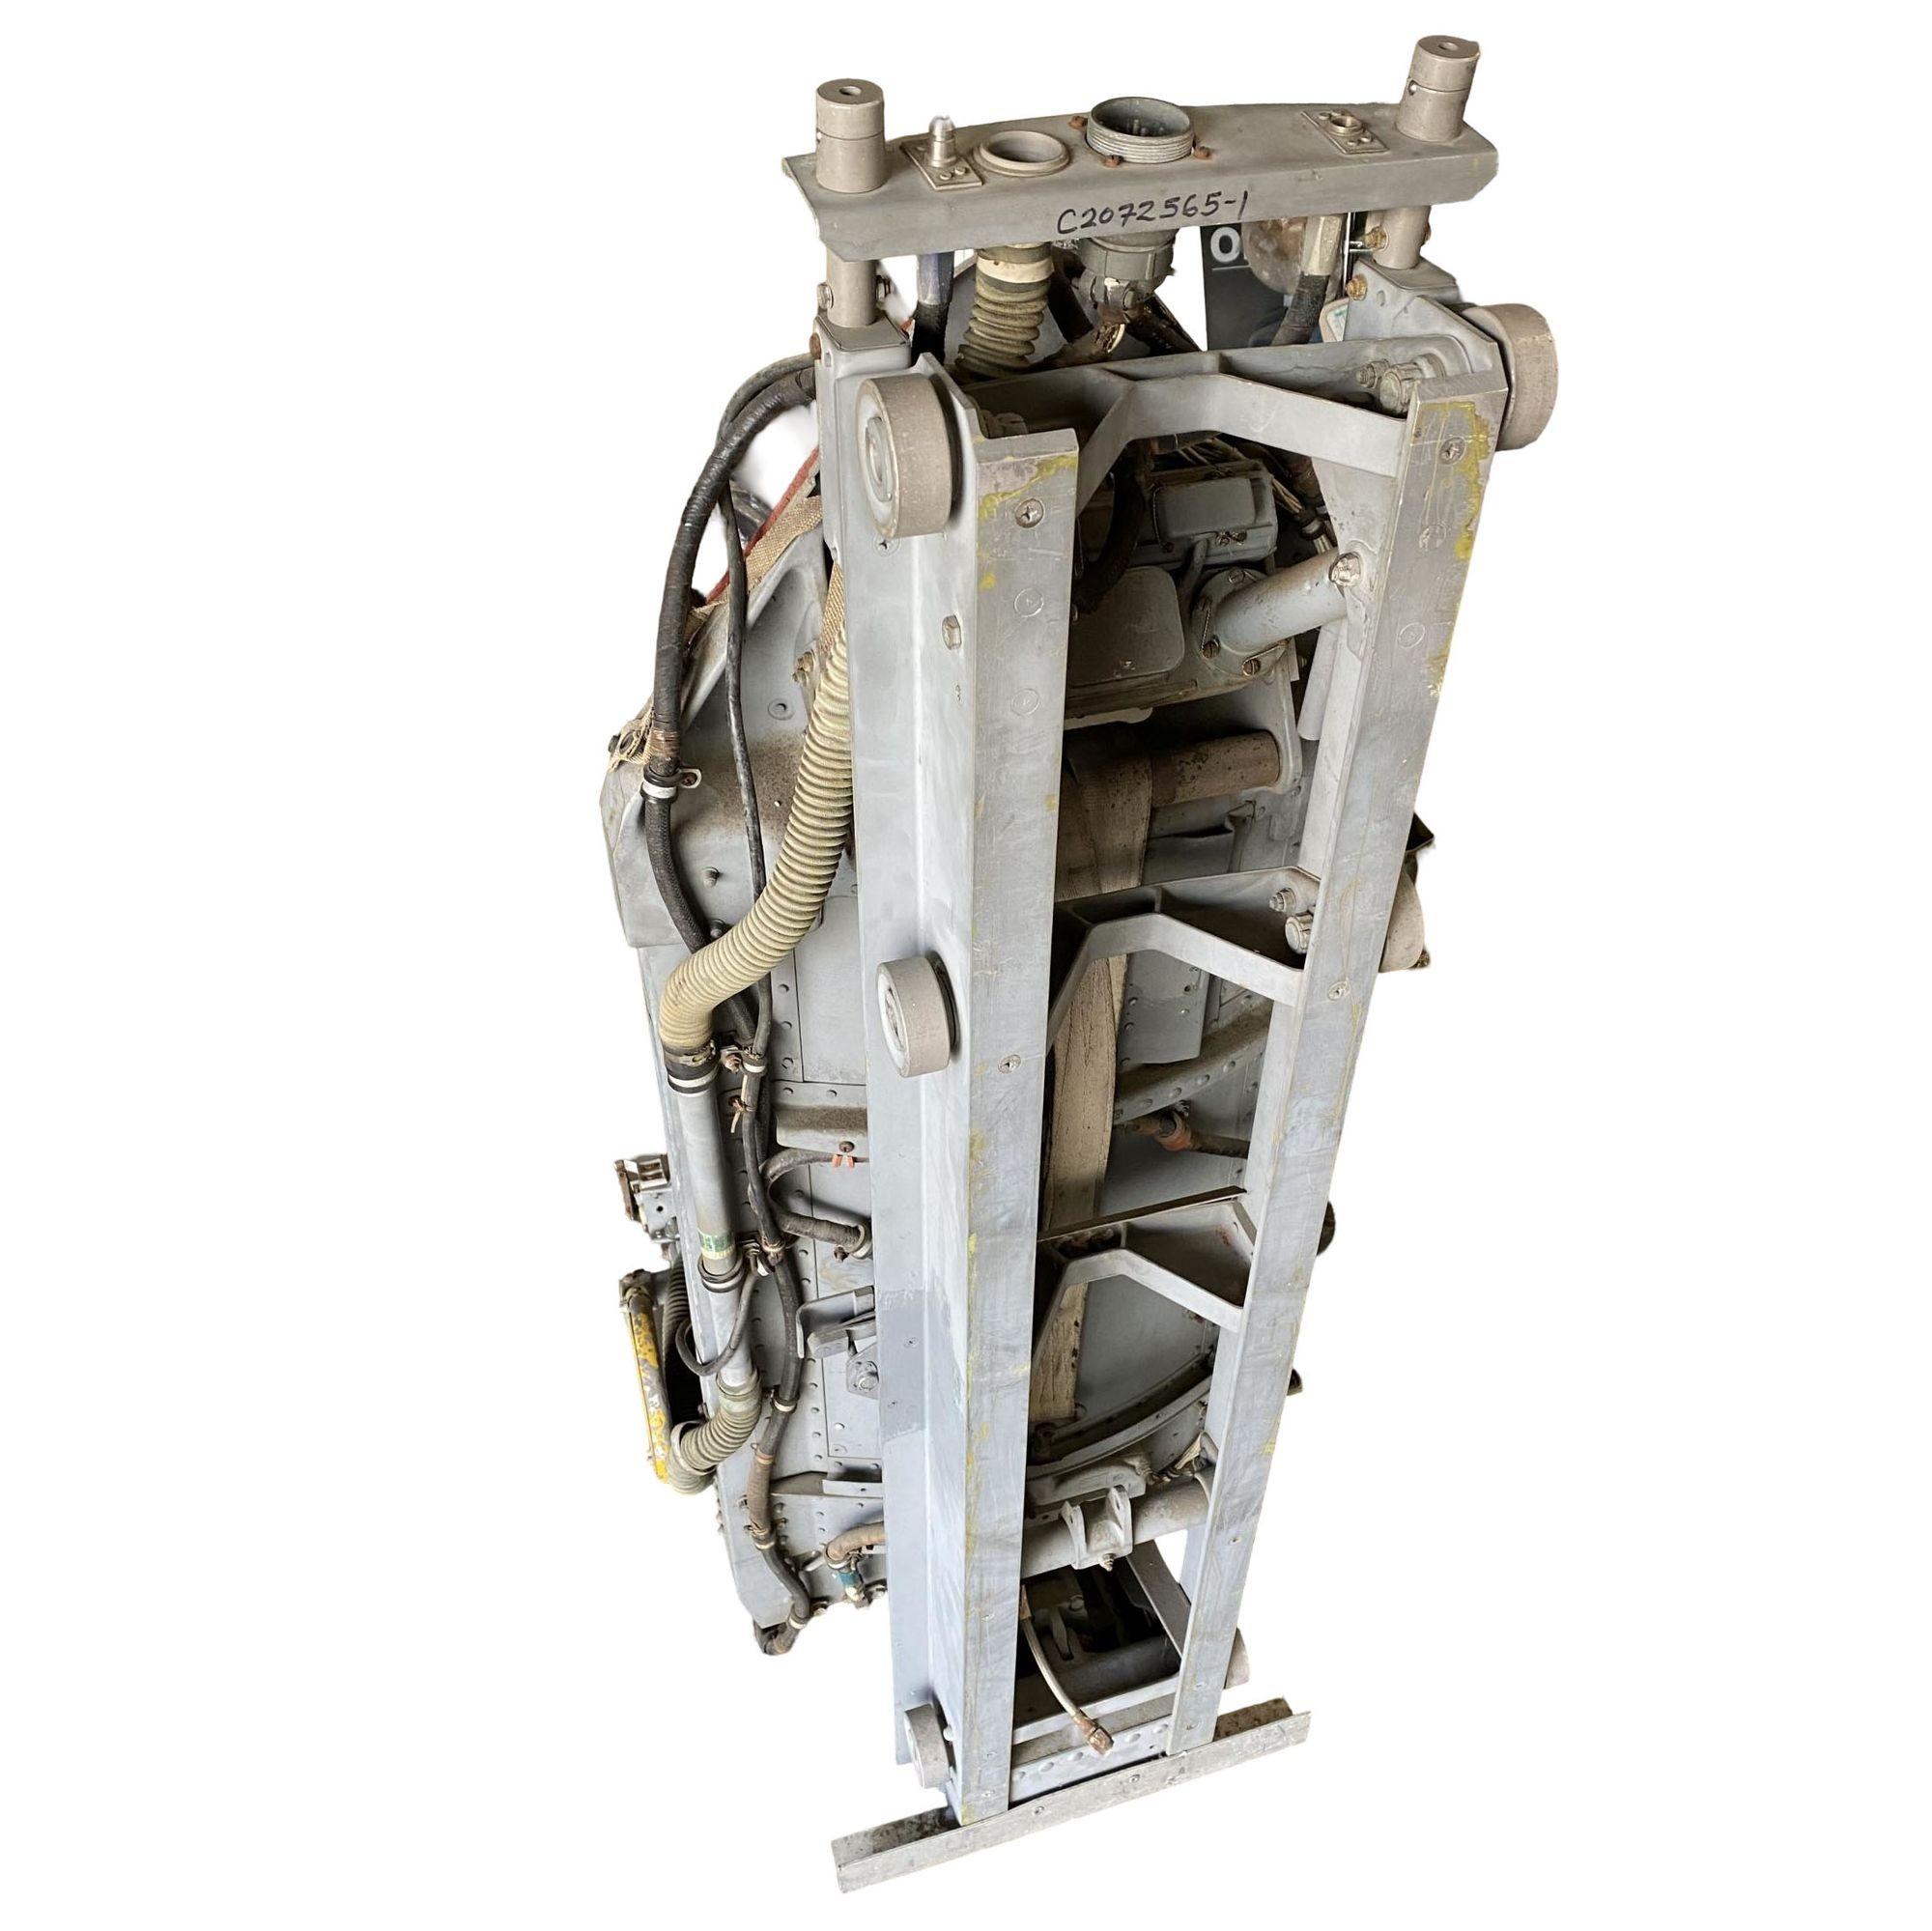 Mid-20th Century Boeing B-52 Bombardier's Ejection Seat For Lower Deck For Sale